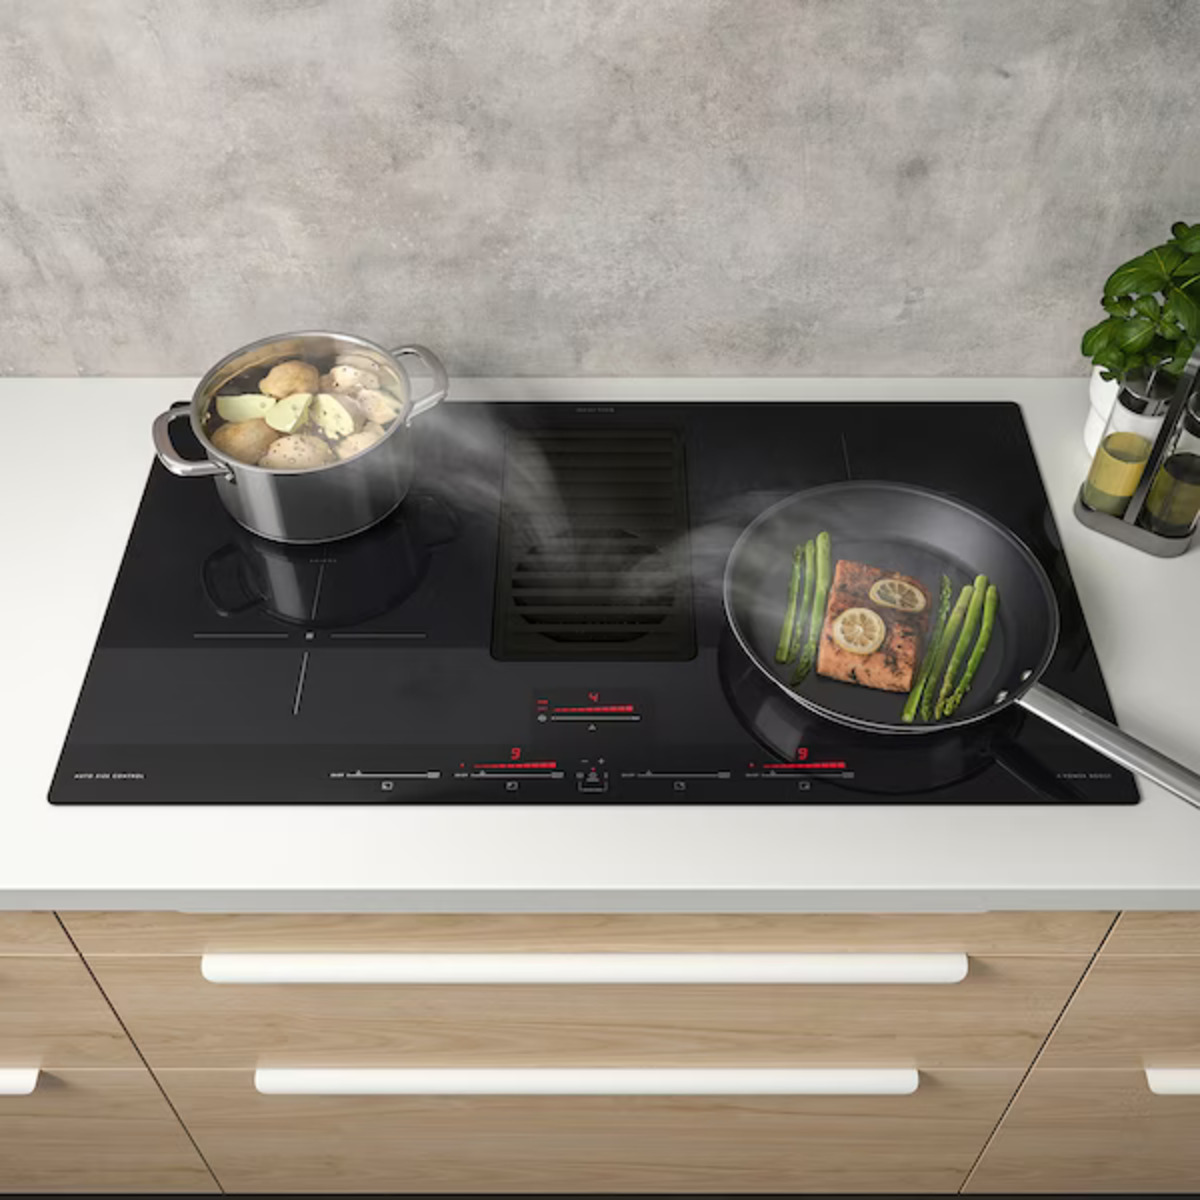 14 Incredible Cooktop With Downdraft For 2023 1691810349 